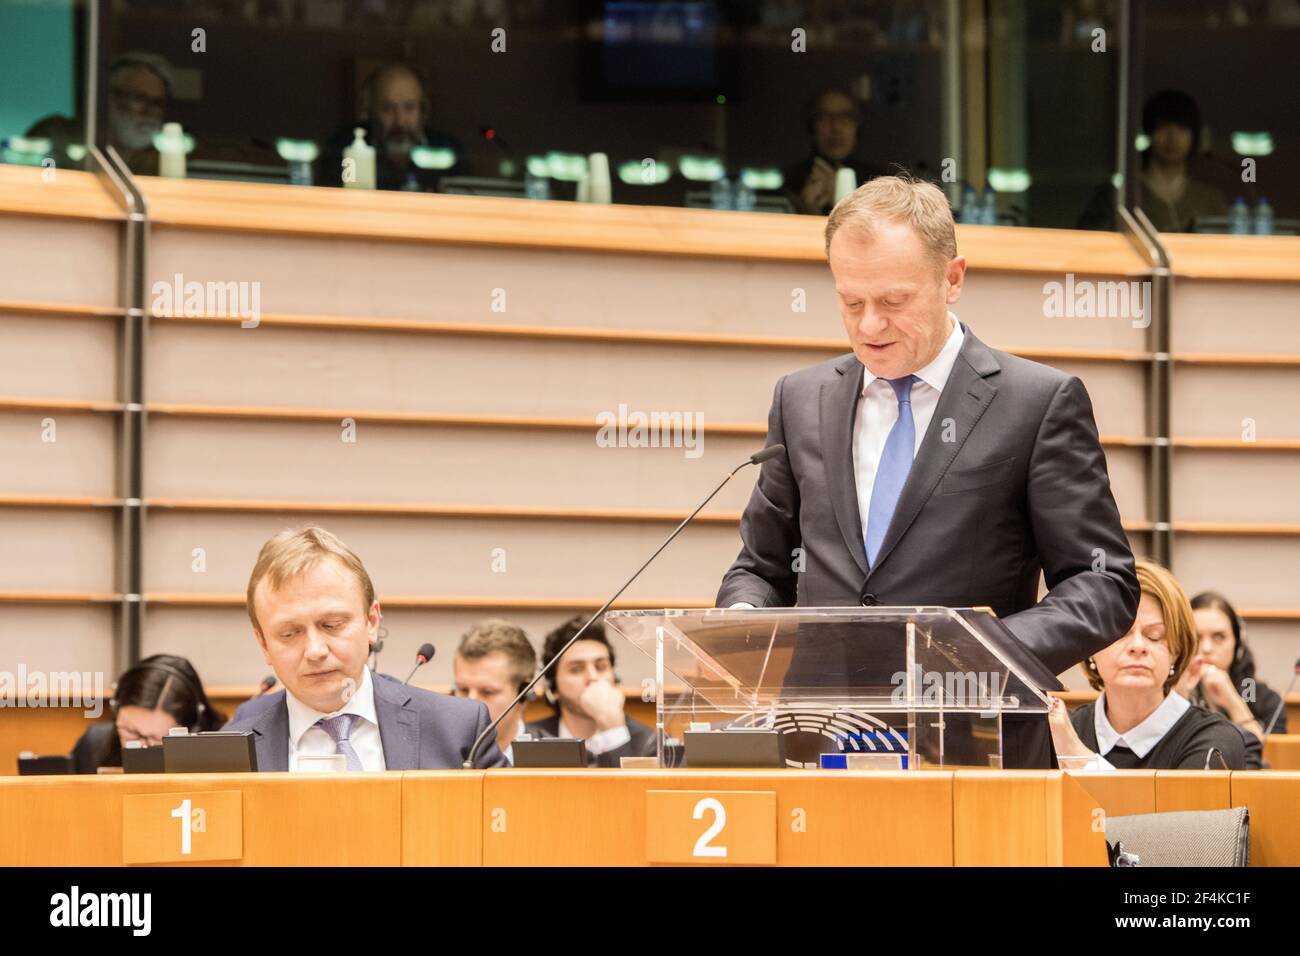 European Parliament, Brussels. The President of the European counsil, Mr. Donald Tusk, pronouncing a statement before the European Parliamant, during it's siting of February 24, 2016. Stock Photo